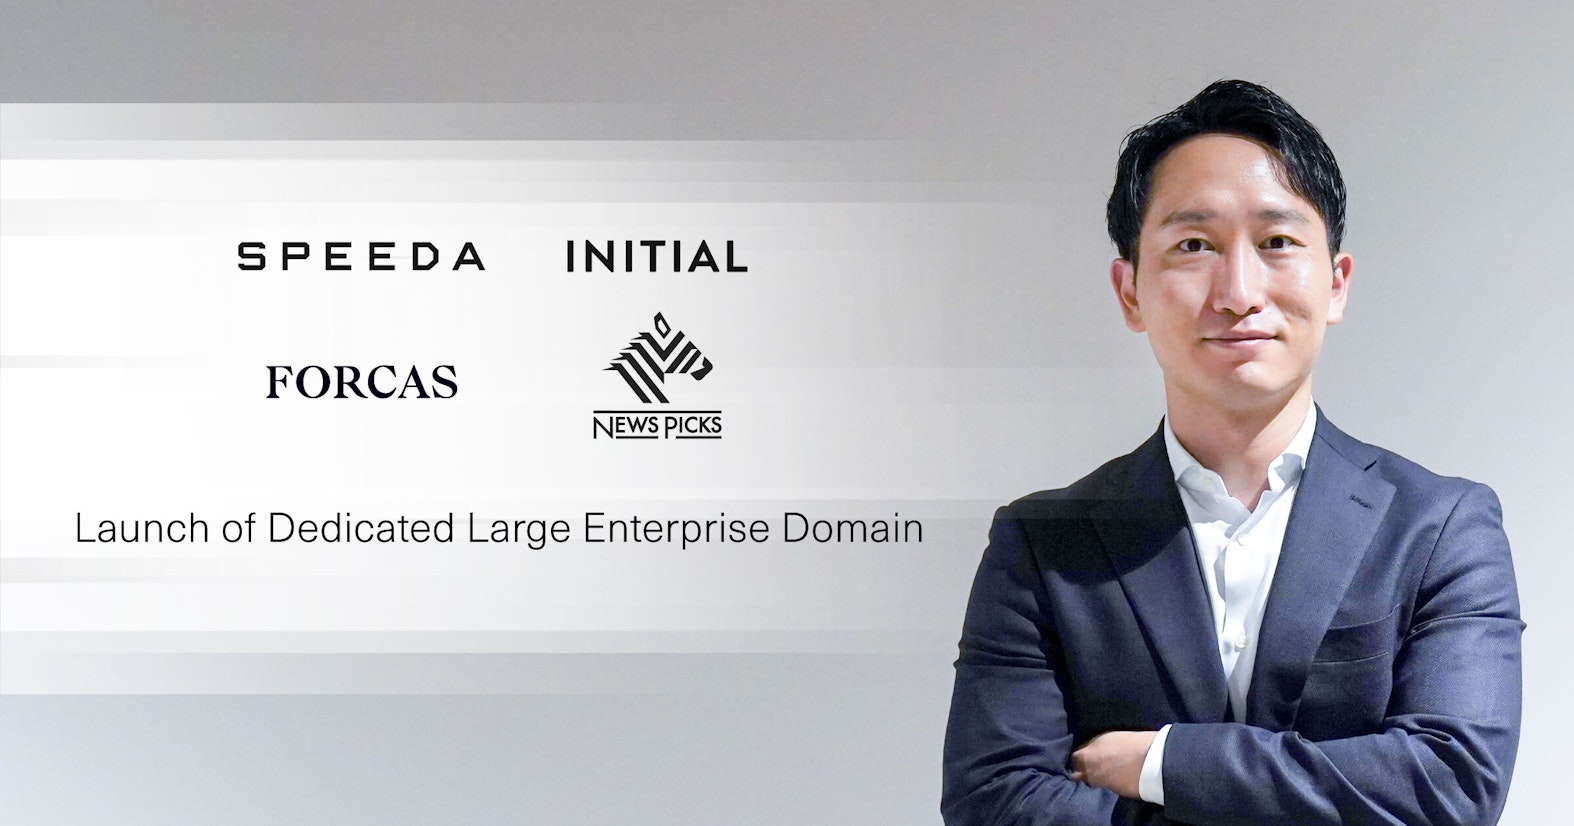 Uzabase Launches Dedicated Large Enterprise Domain, Appoints New Executive Officer; Shifting to a new organization that creates and delivers value across its B2B SaaS products
